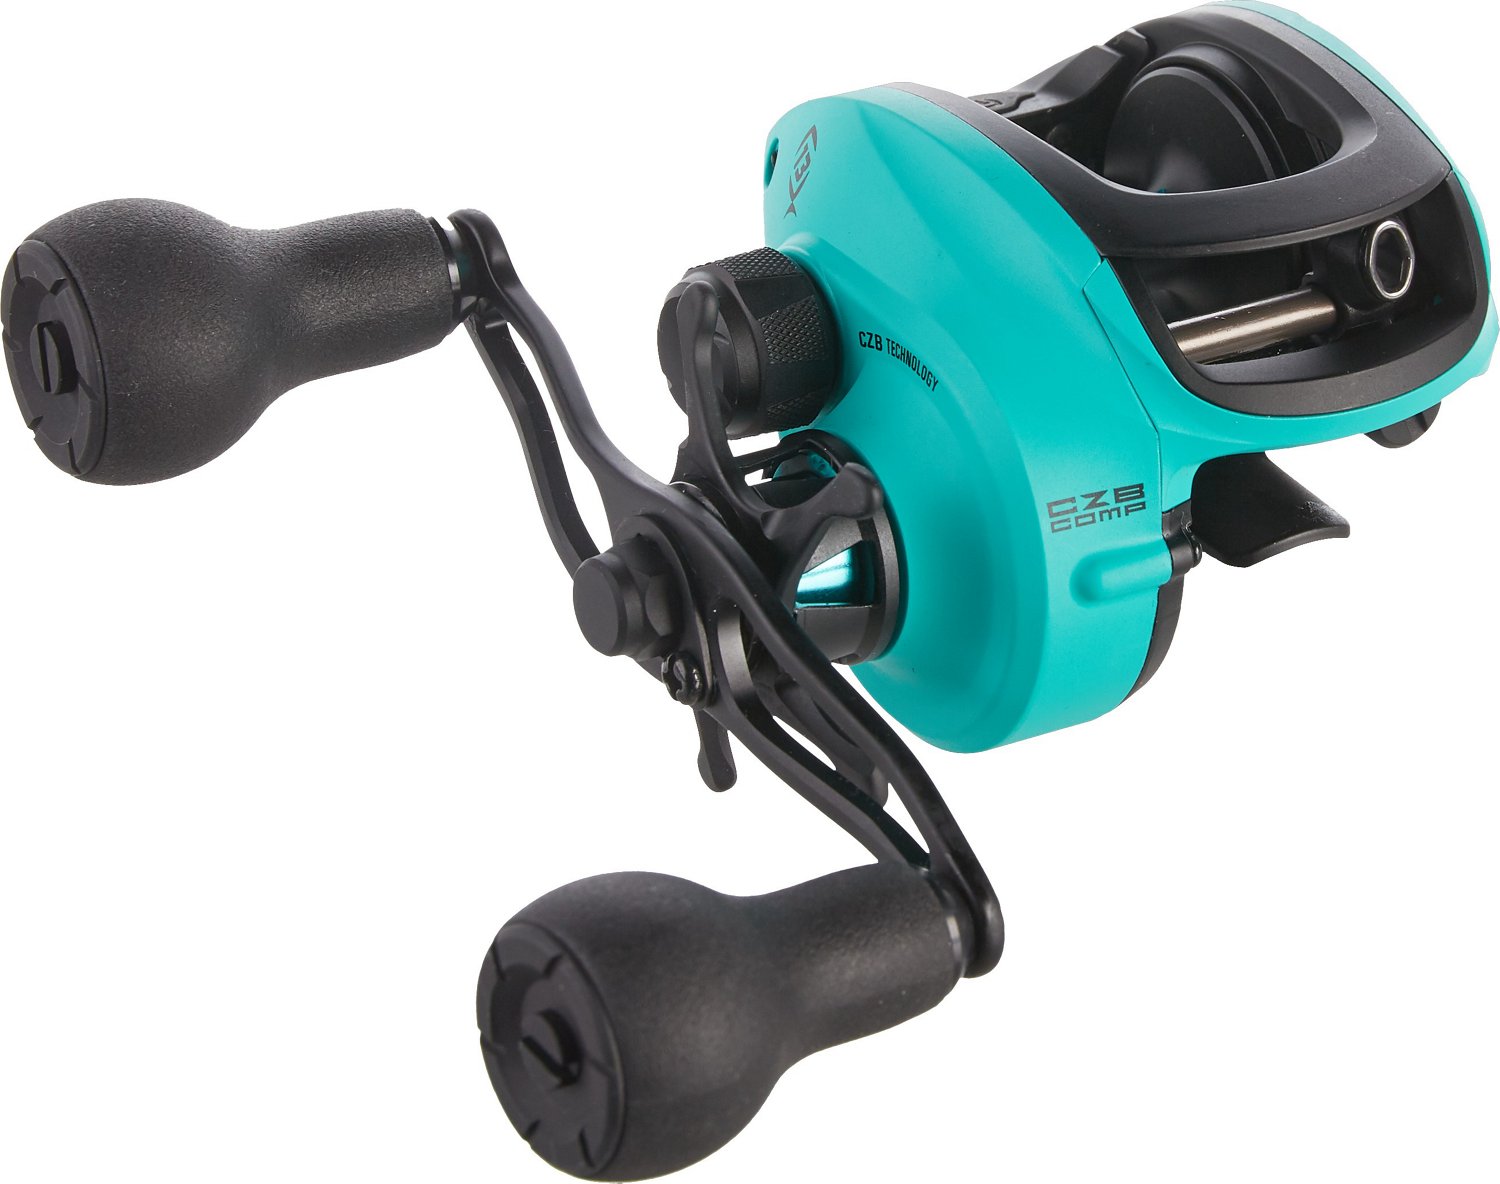 13 Fishing Inception G2 Reel Review - NEW Gerald Swindle Reel